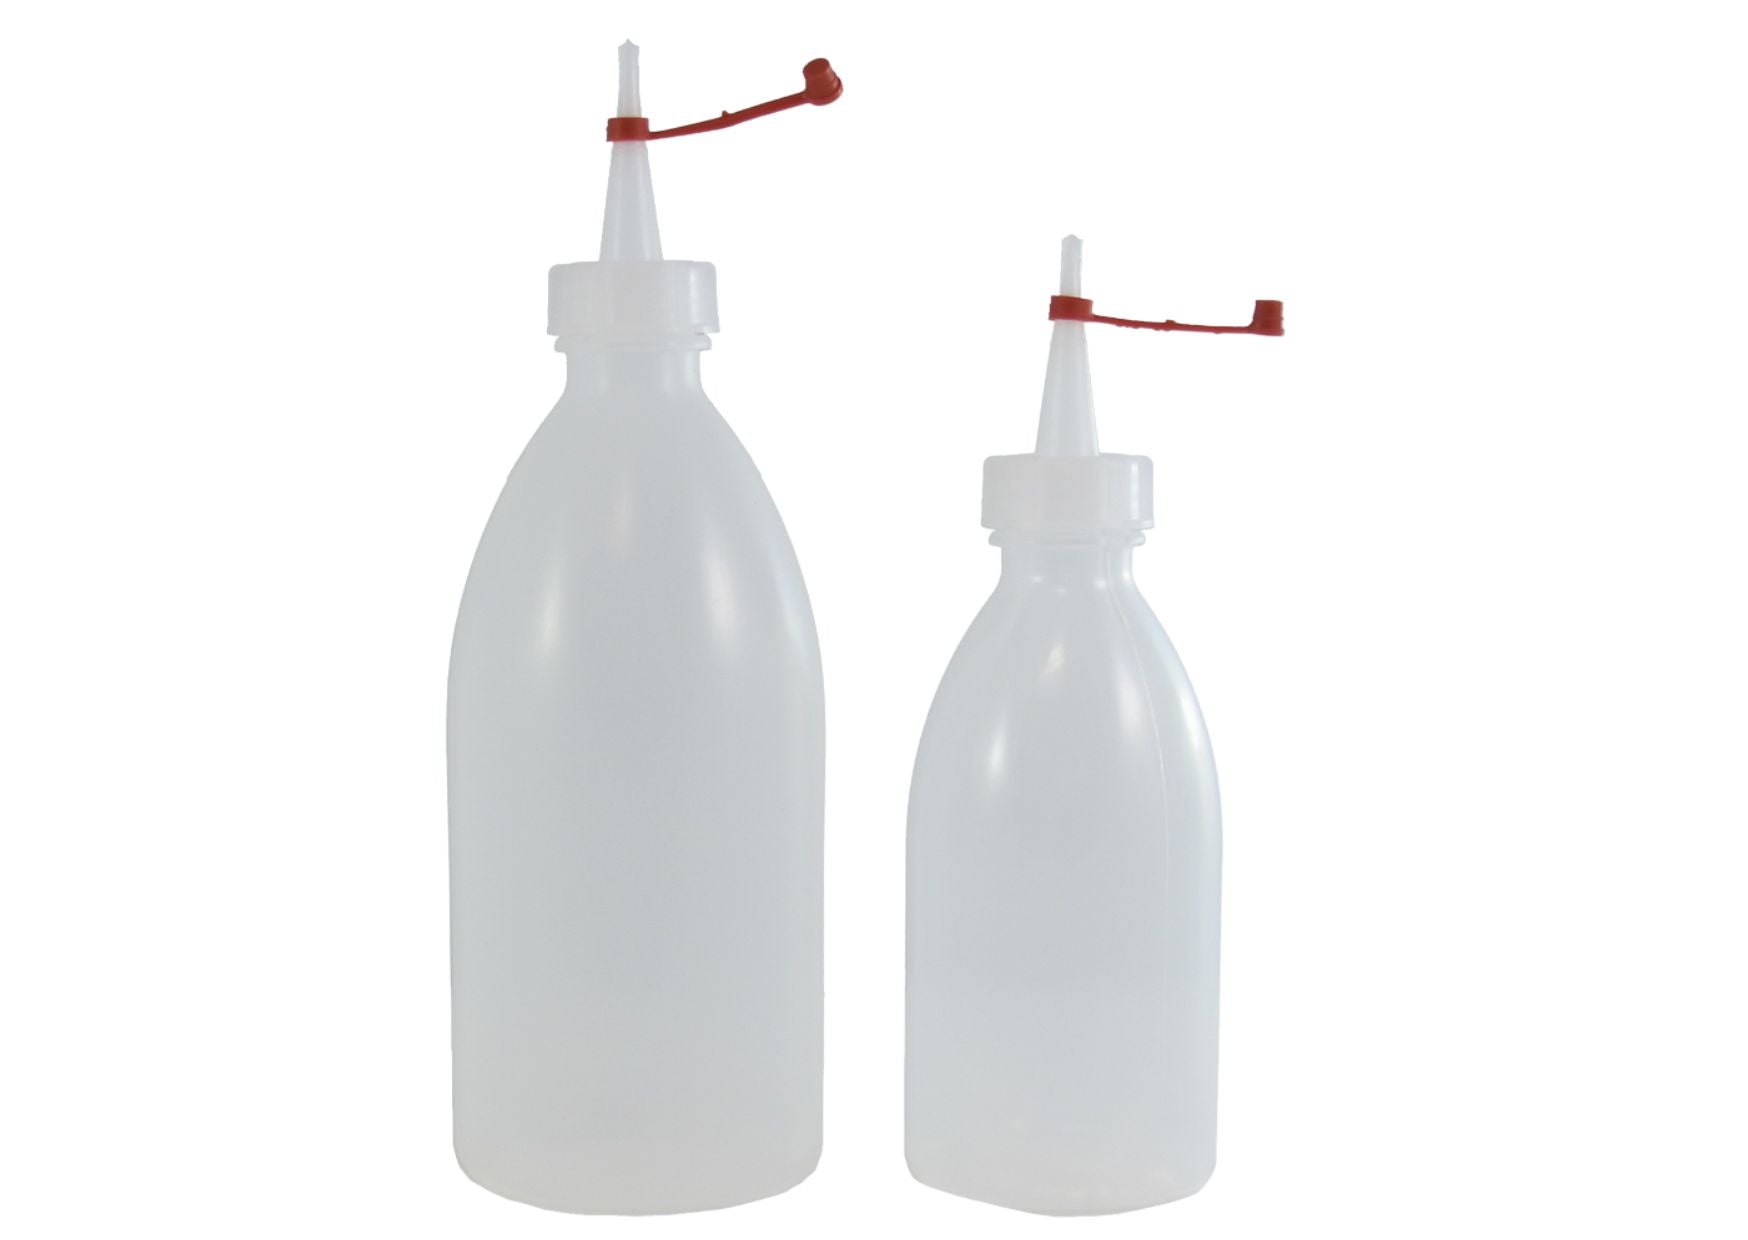 Empty bottle with funnel attachment, 500 ml bottle - 0